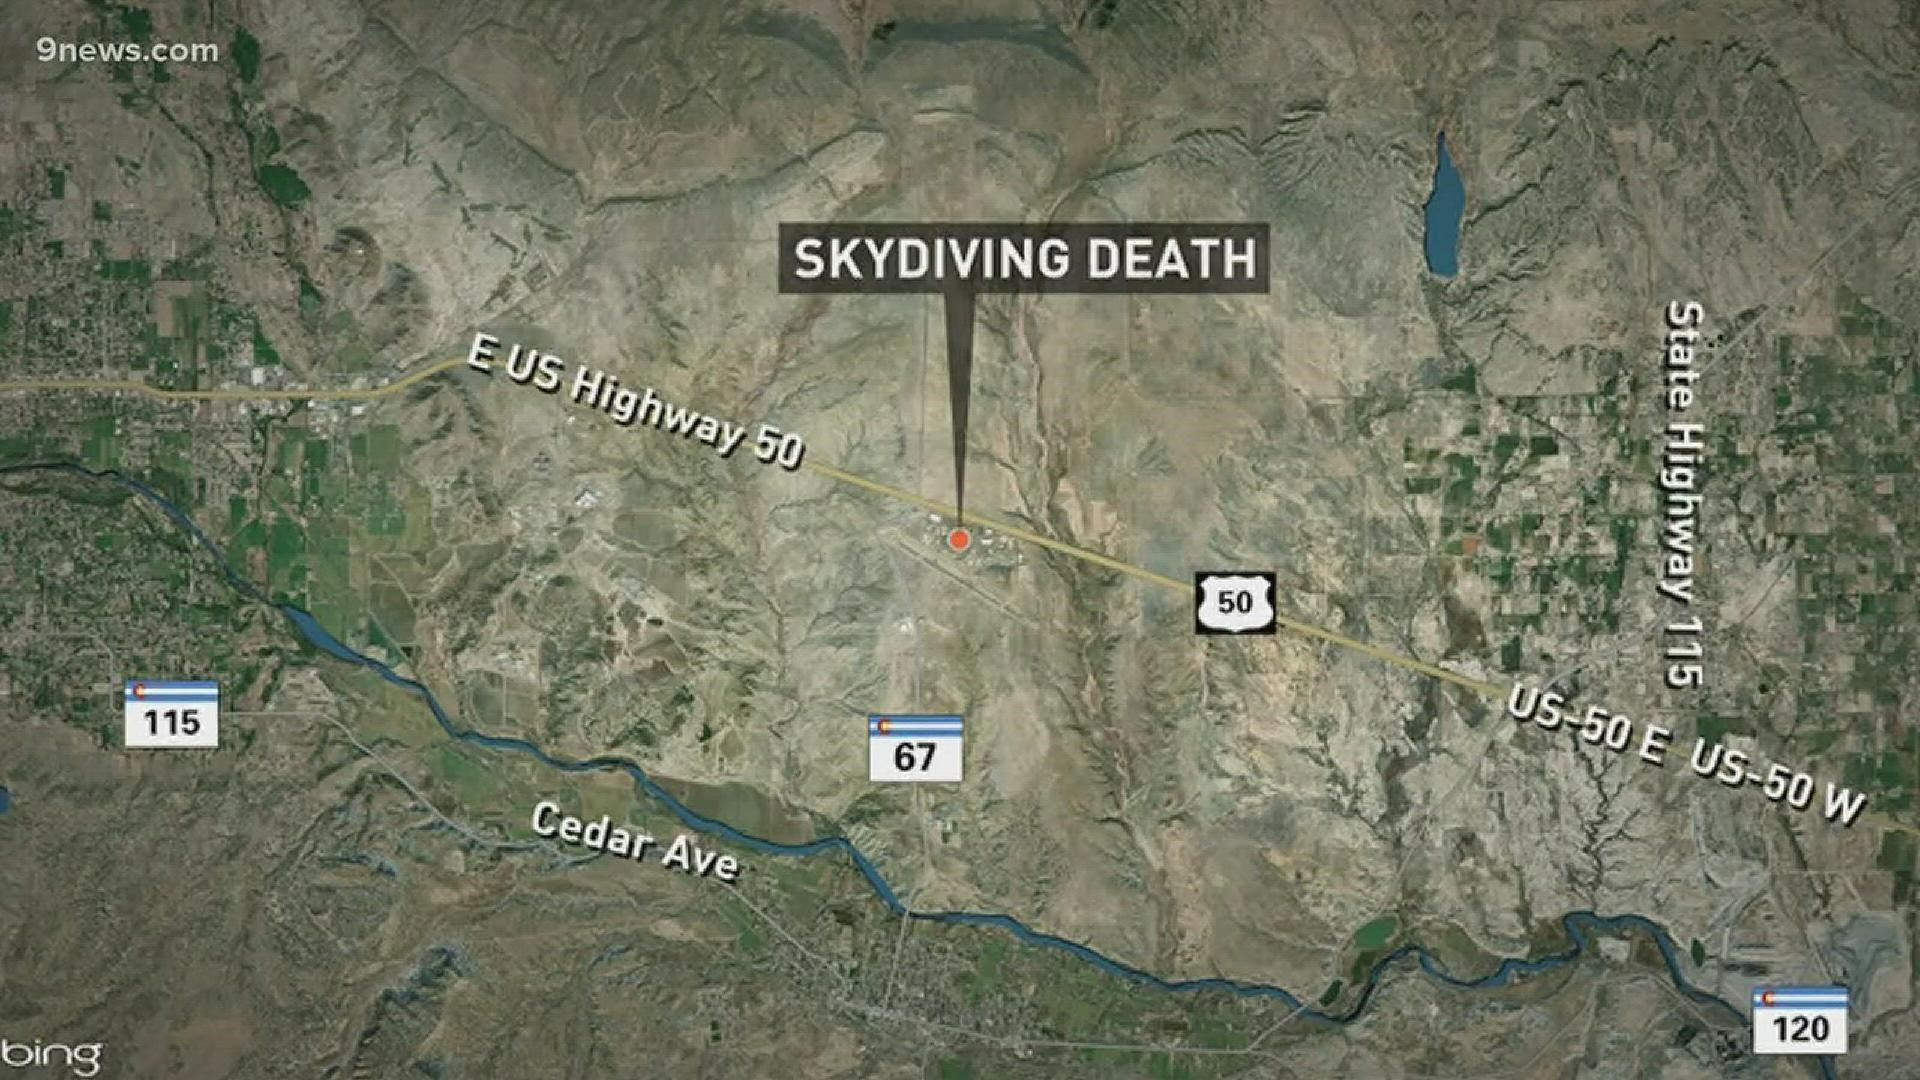 A teenager died in a skydiving accident Sunday, according to the Fremont County Sheriff's Office.